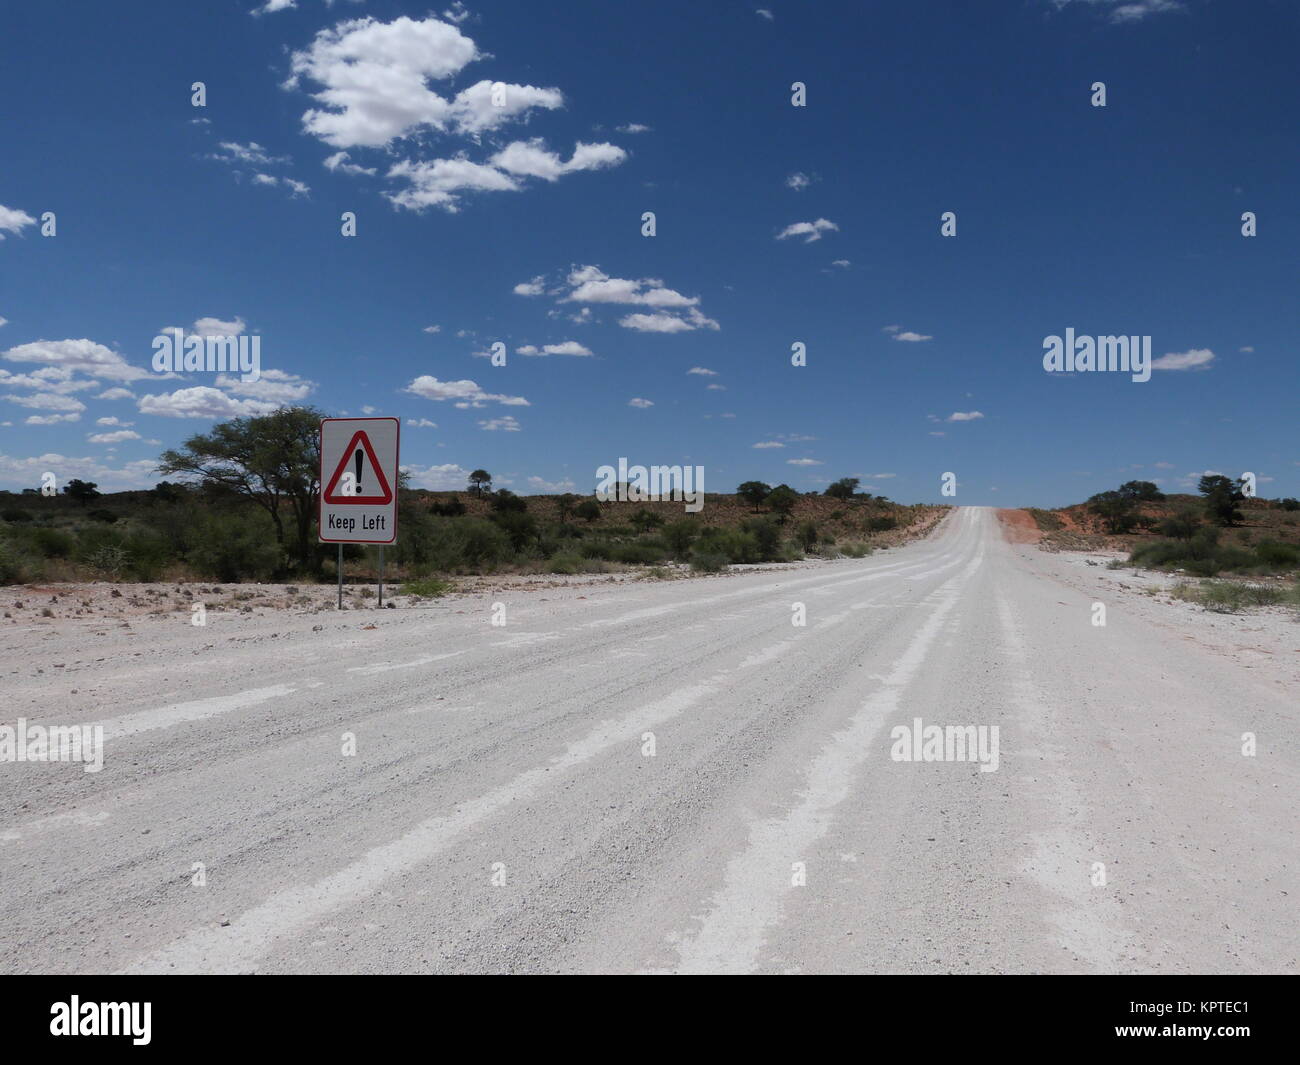 Gravel road in Namibia with sign 'Keep left' Stock Photo